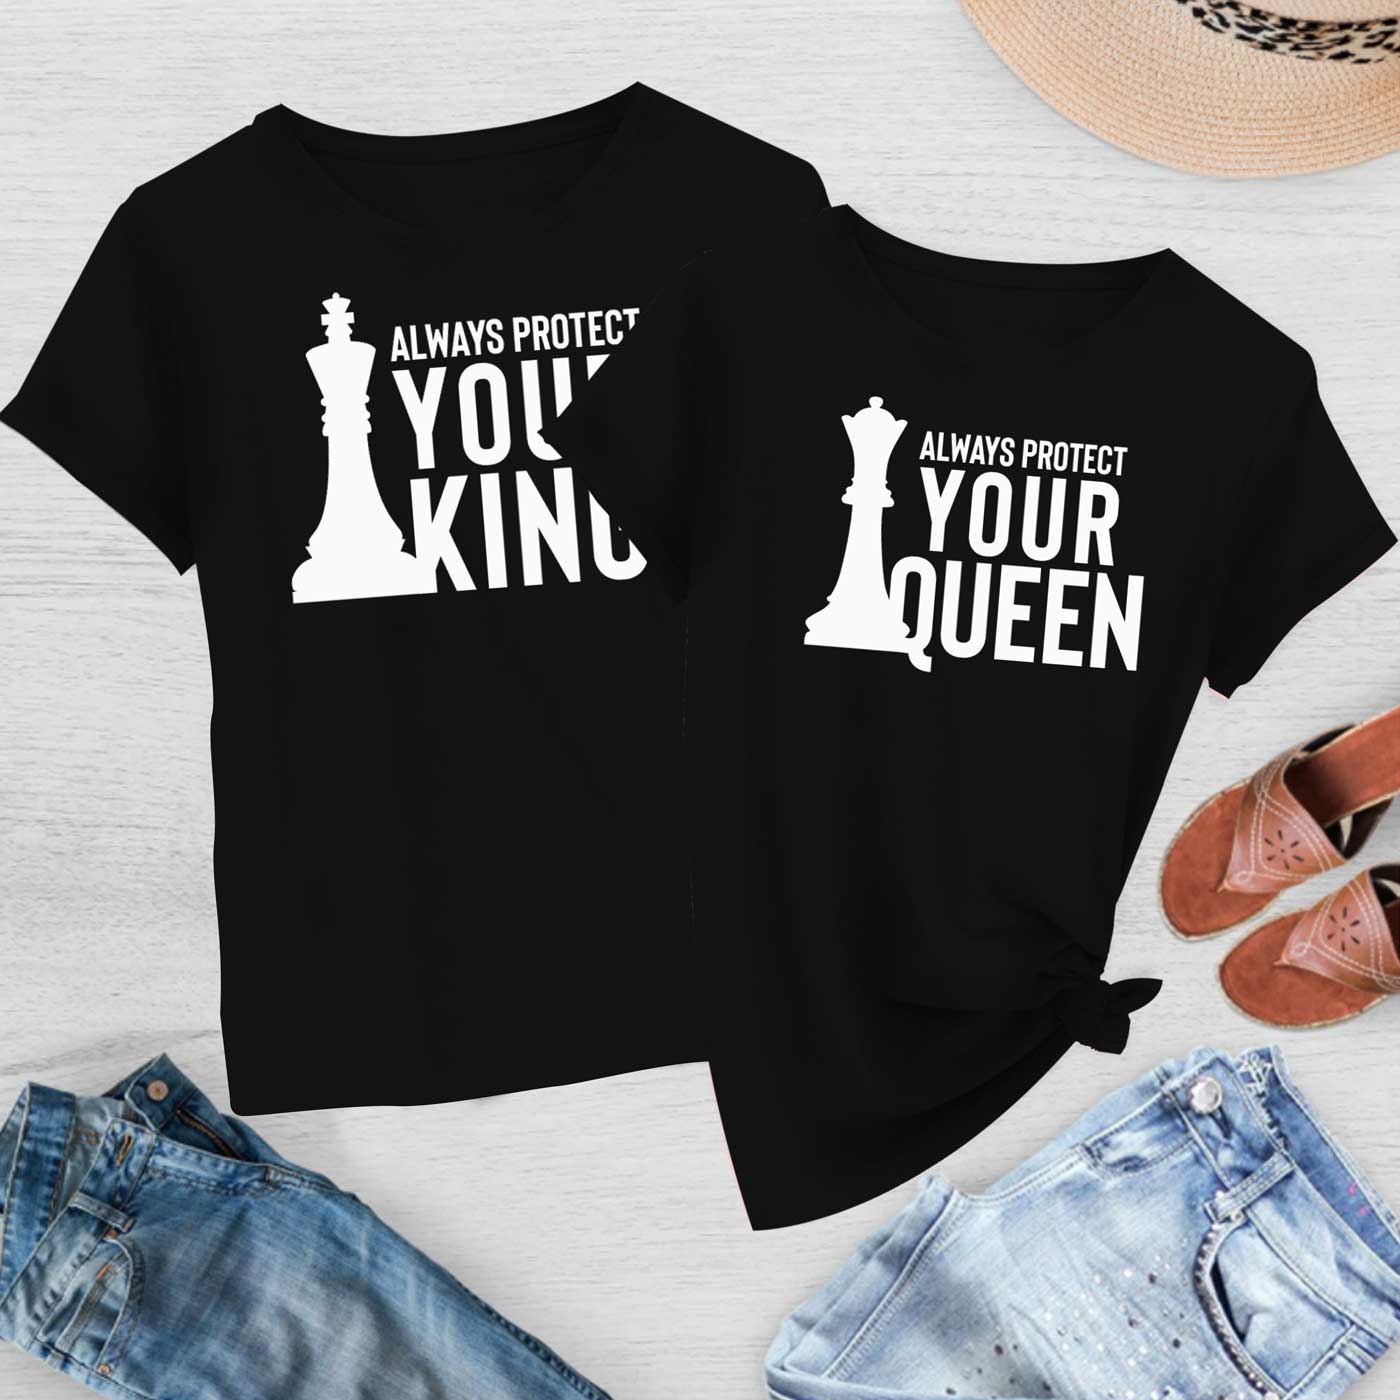 Always Protect Your King/Queen Tees